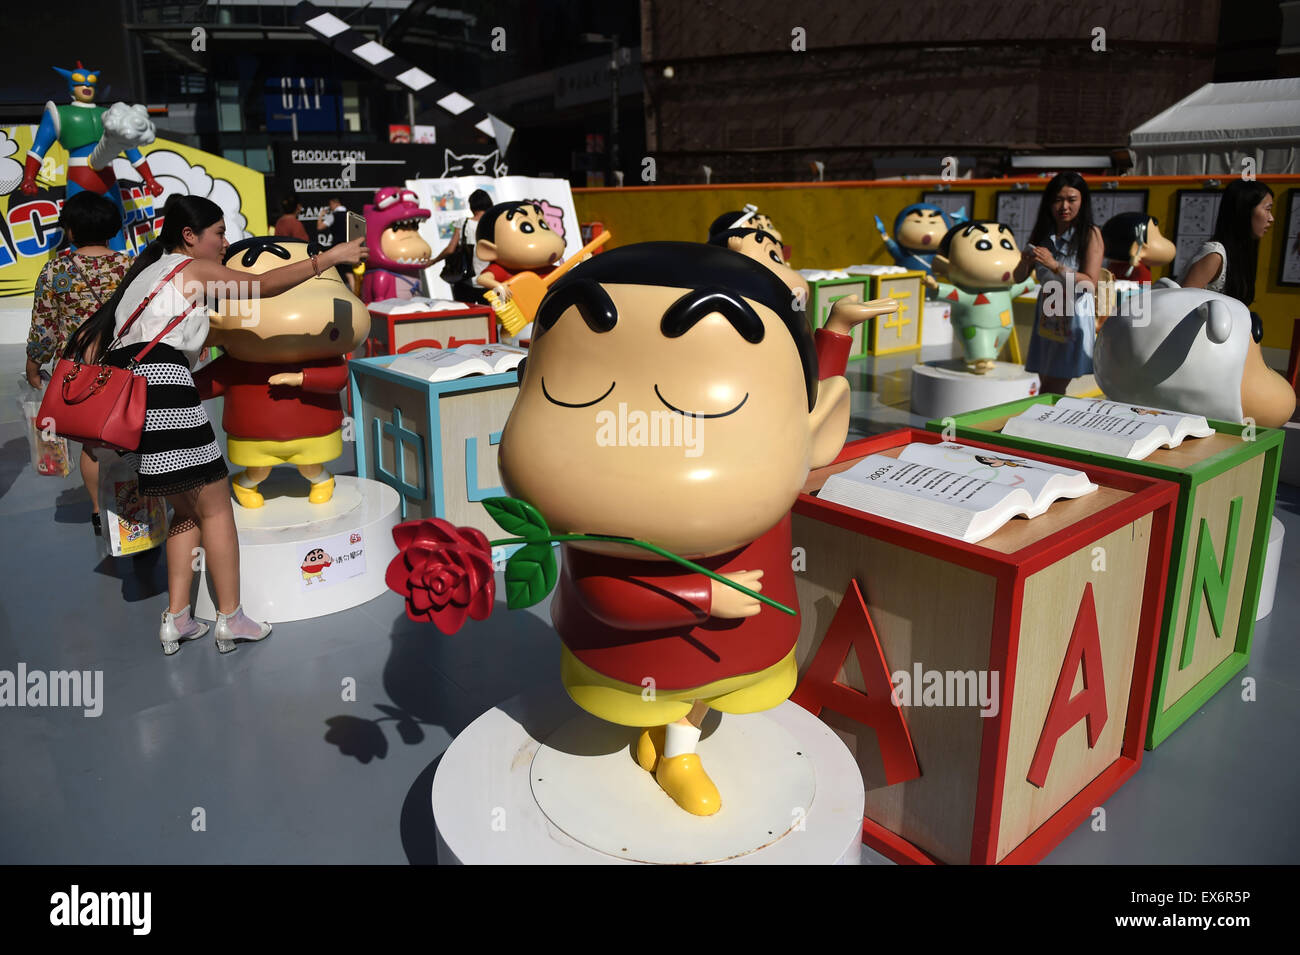 Shenyang, China's Liaoning Province. 8th July, 2015. People visit the exhibition marking the 25th anniversary of Japanese manga series Crayon Shin-chan in Shenyang, northeast China's Liaoning Province, July 8, 2015. The exhibition will be open to public on July 11. © Pan Yulong/Xinhua/Alamy Live News Stock Photo